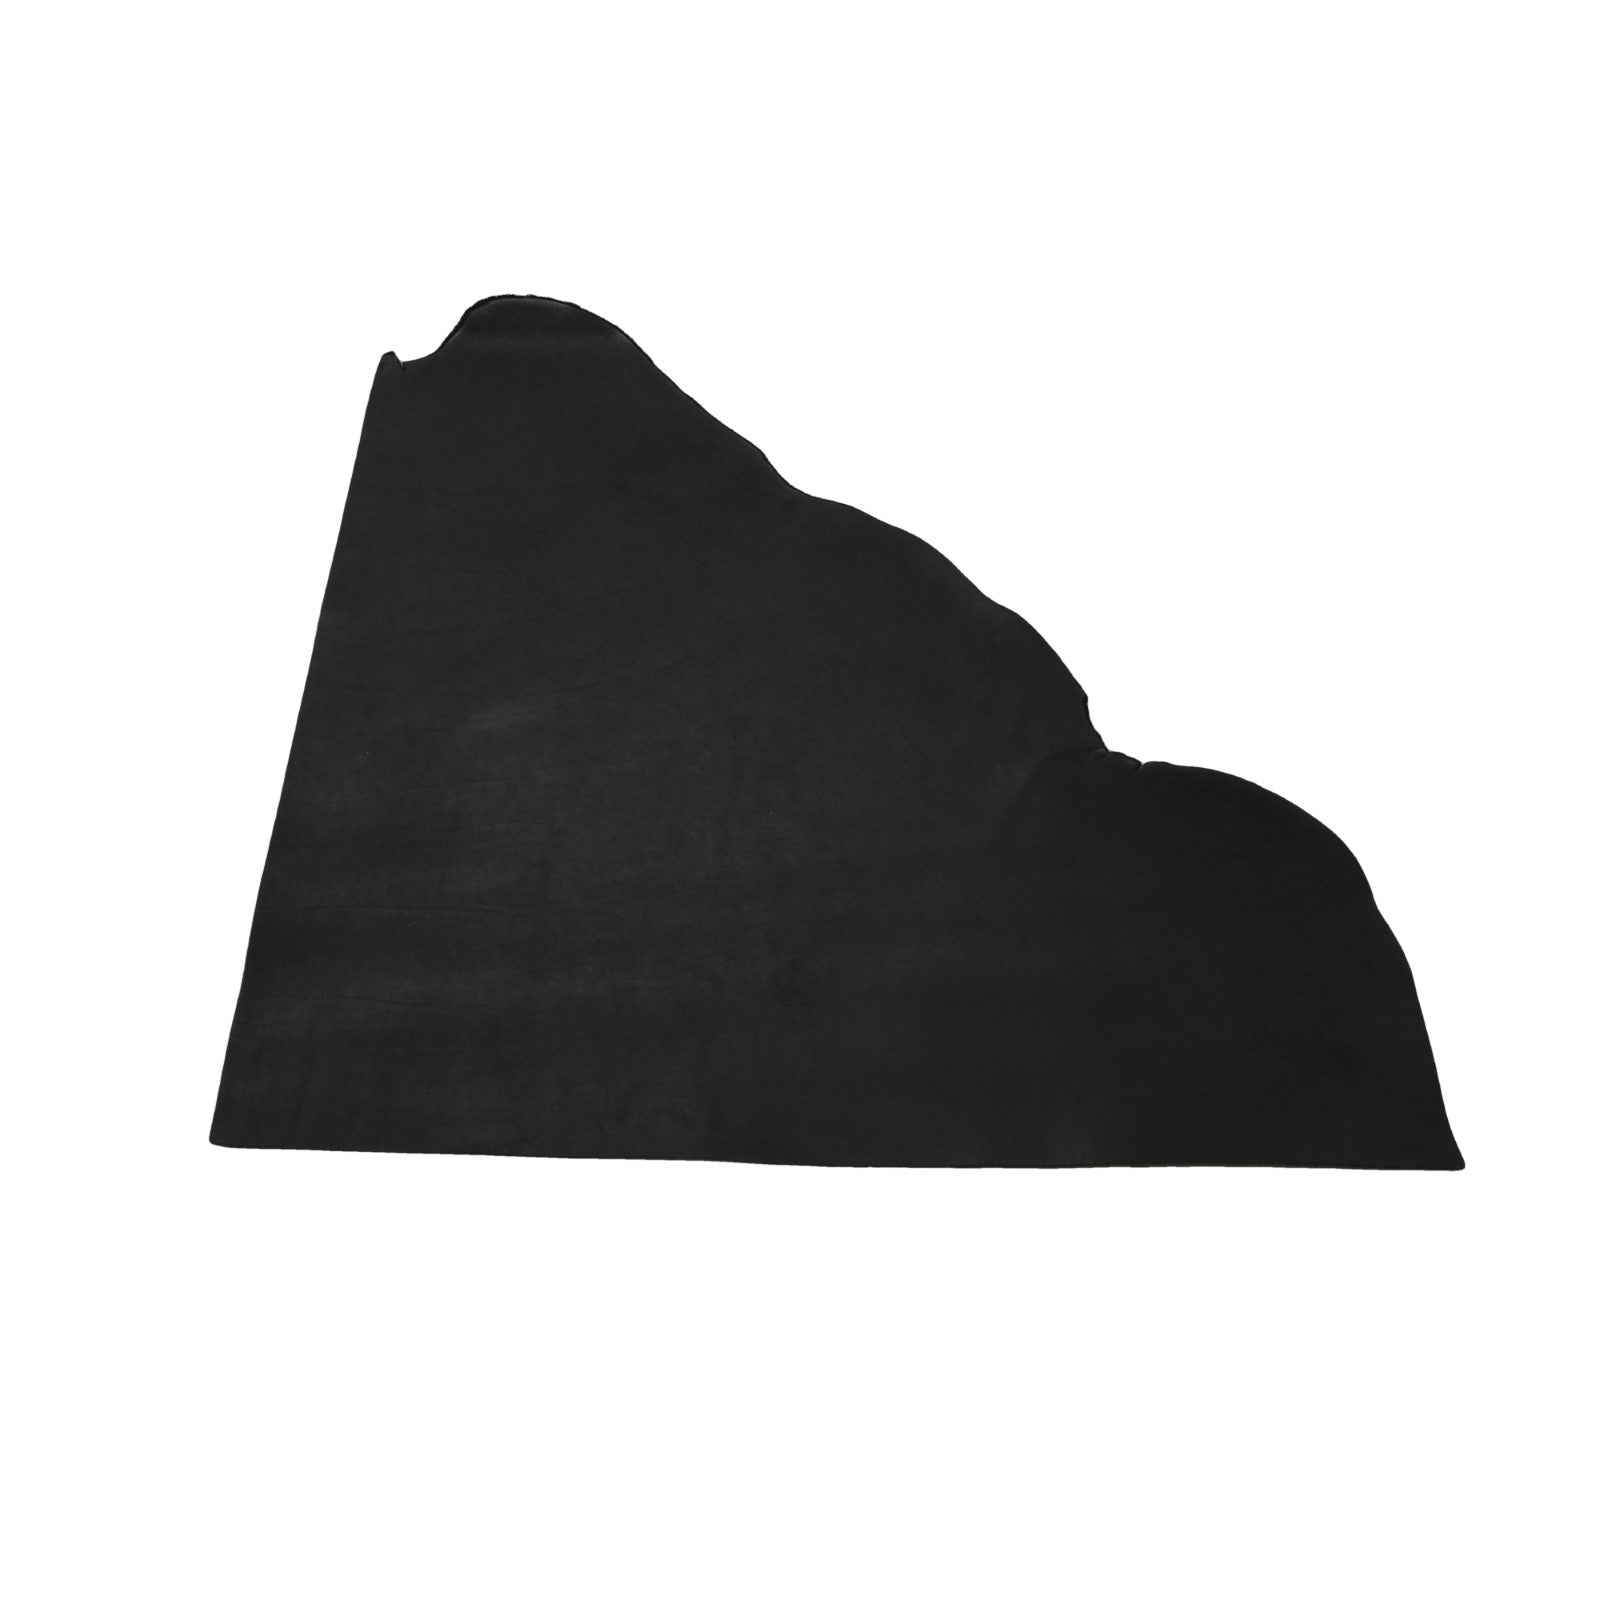 Back Country Black, 18-29 Sq Ft Oil Tanned Sides, Summits Edge, 6.5 - 7.5 Sq Ft / Project Piece (Top) | The Leather Guy